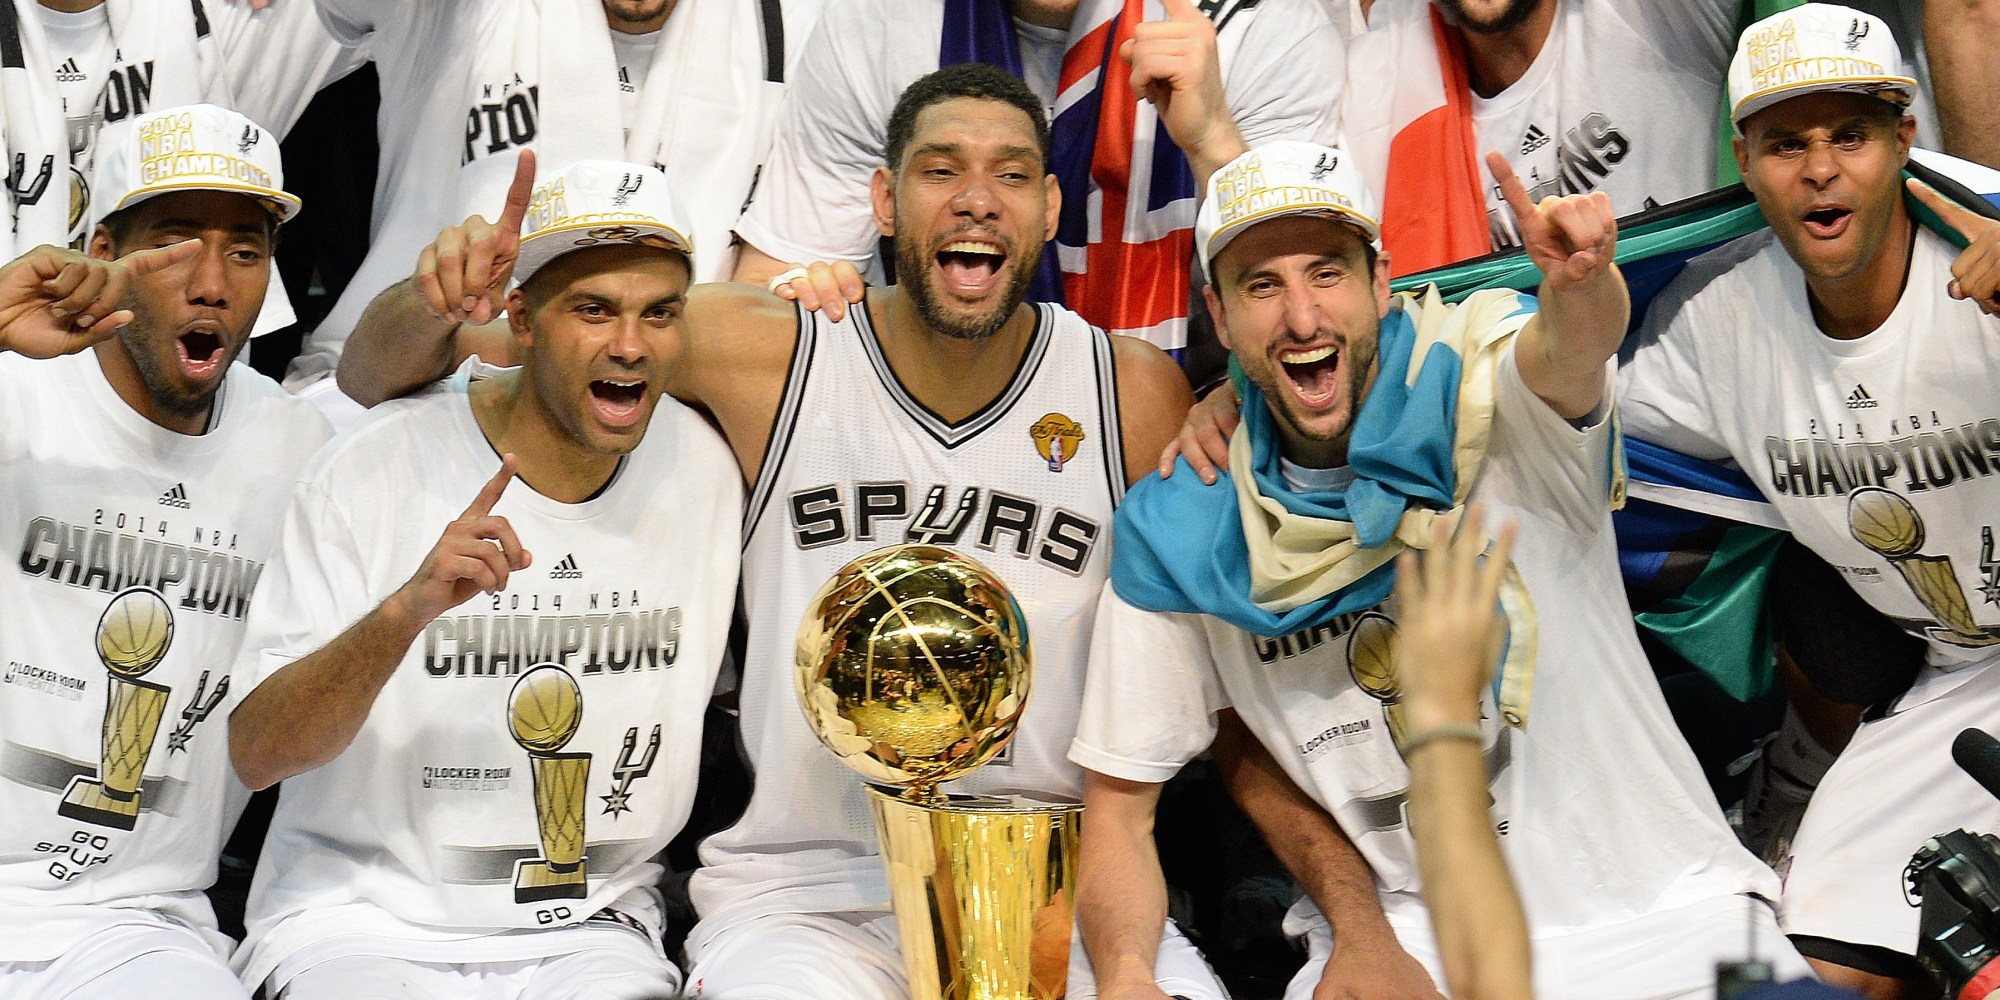 San Antonio Spurs Are Champions Again After Defeating Miami Heat In 2014 NBA Finals ...2000 x 1000